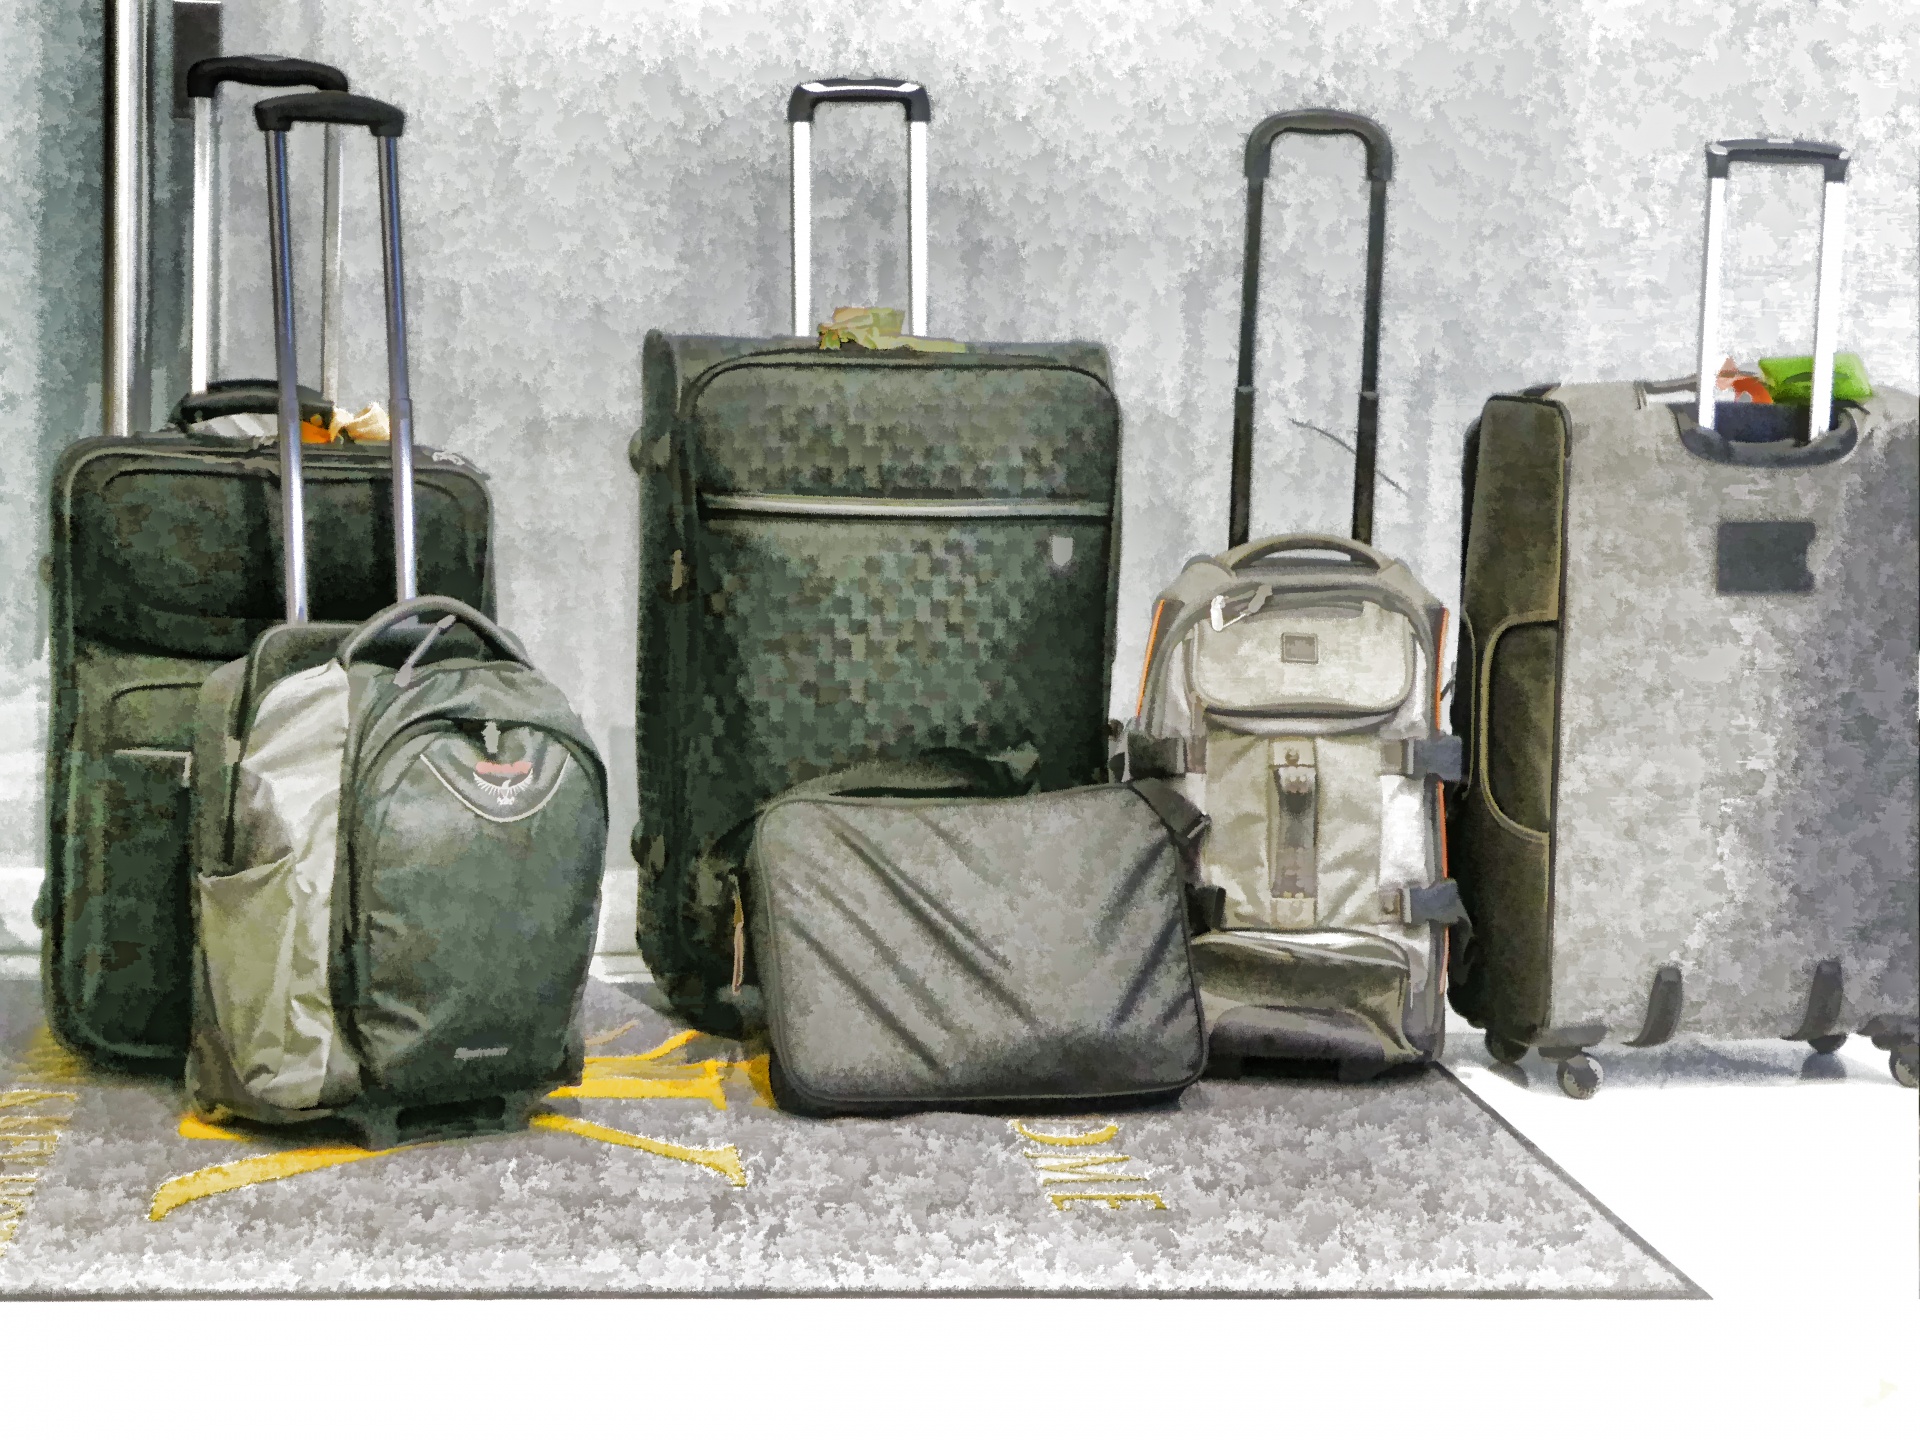 artistic rendering of several bags of luggage in a hotel lounge freeimage, publicdomain, CC0